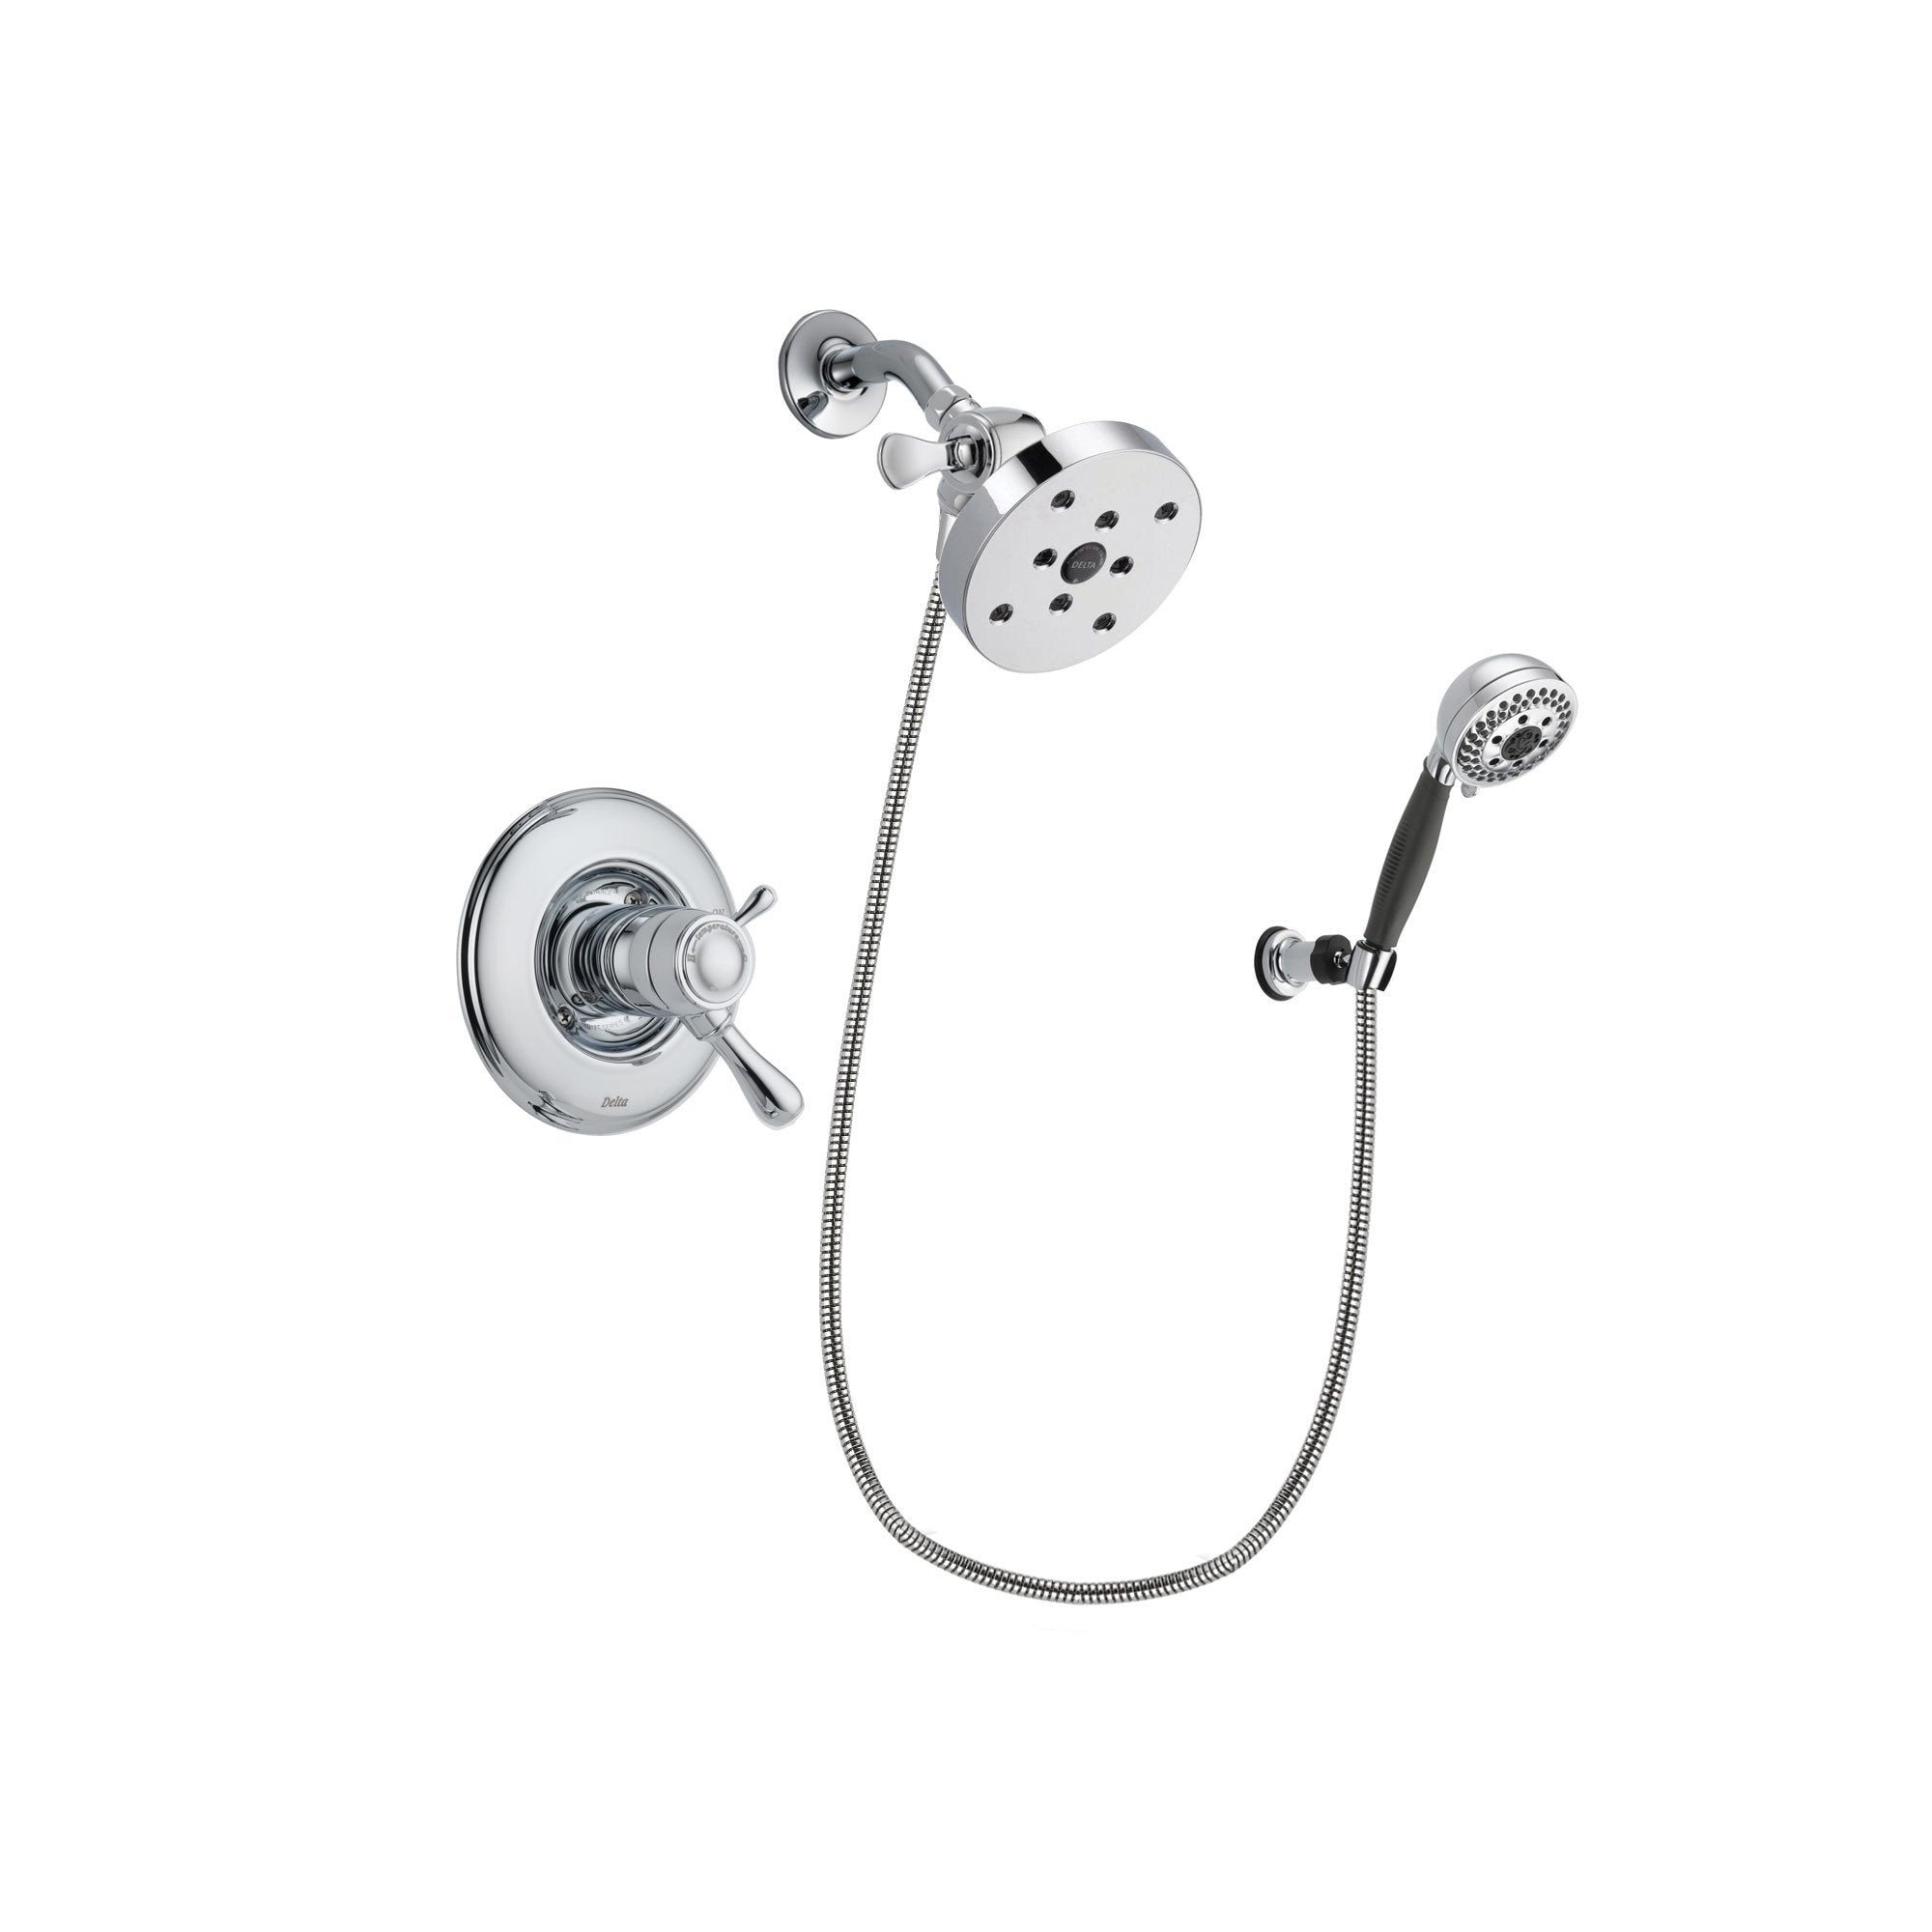 Delta Leland Chrome Finish Thermostatic Shower Faucet System Package with 5-1/2 inch Shower Head and 5-Spray Modern Handheld Shower with Wall Bracket and Hose Includes Rough-in Valve DSP1212V